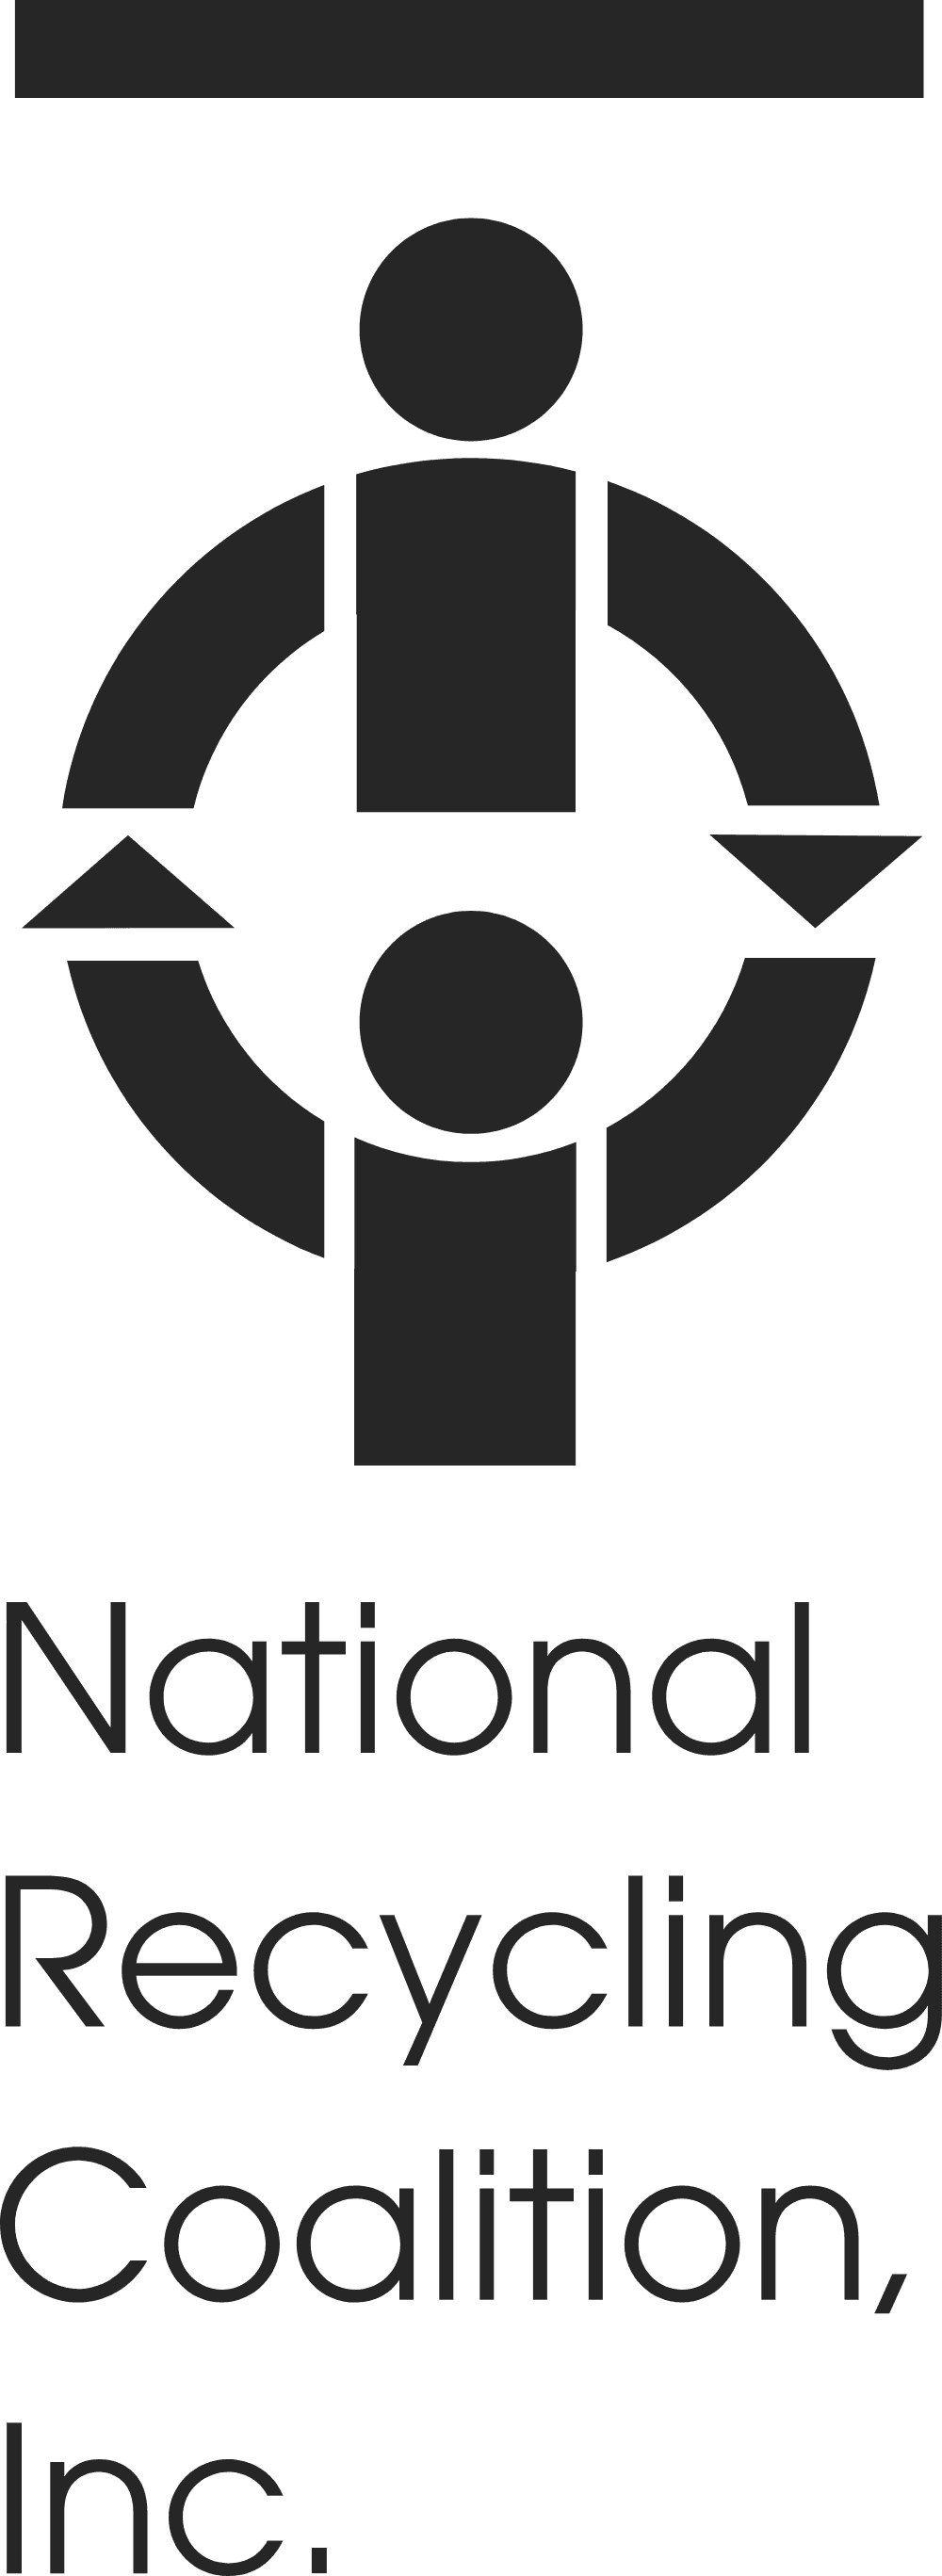 National Recycling Coalition Logo download